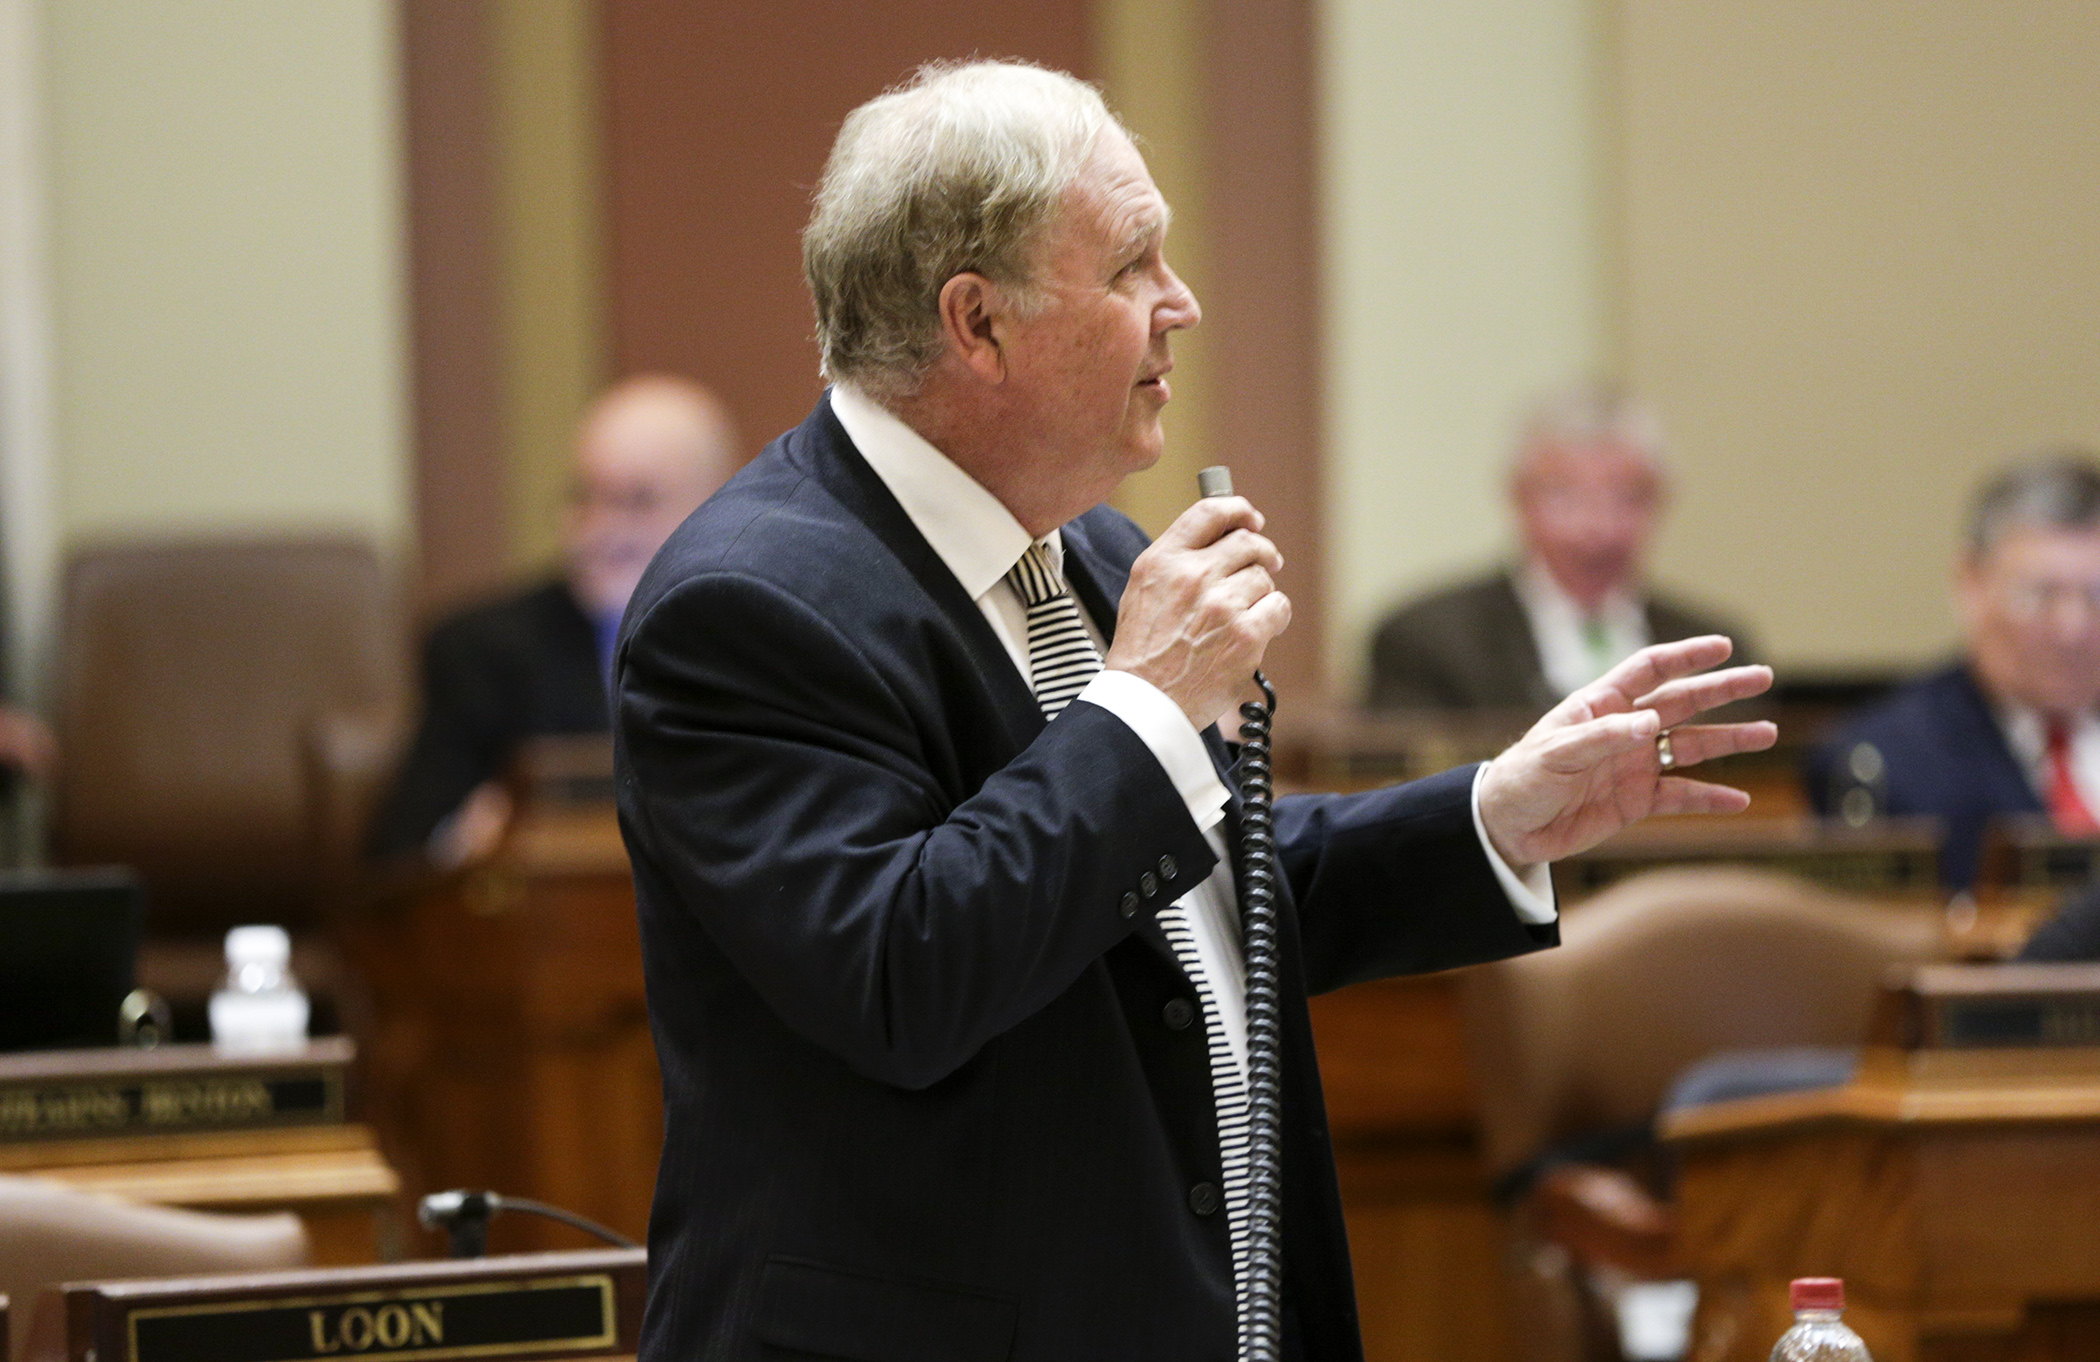 Rep. Dean Urdahl, chair of the House Capital Investment Committee, describes provisions of HF4404, the bonding bill, during opening remarks May 14. The bill was passed 84-39. Photo by Paul Battaglia